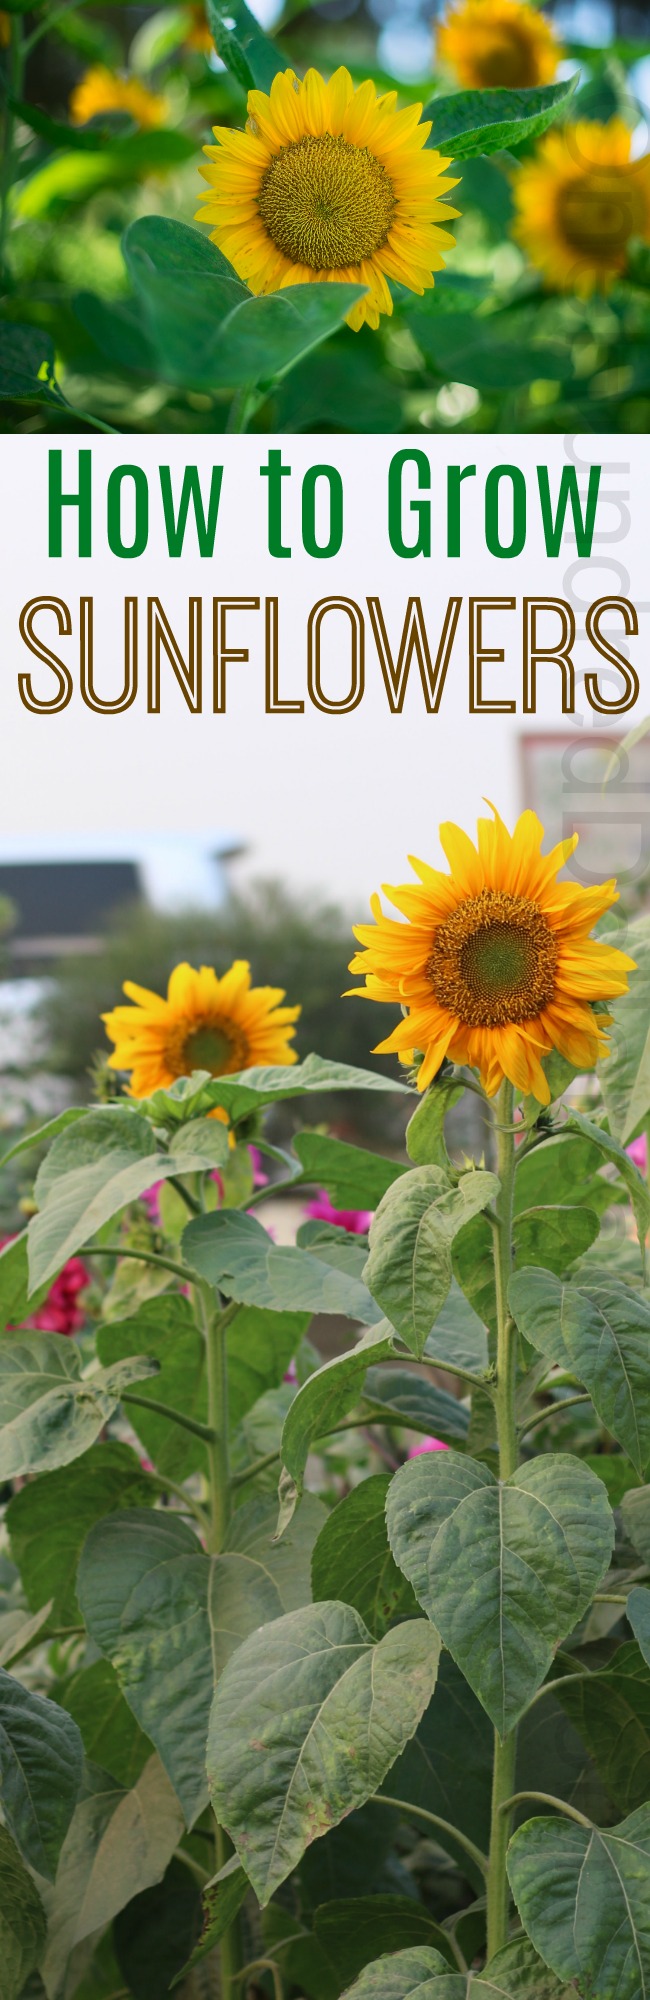 How to Grow Sunflowers {Start to Finish}